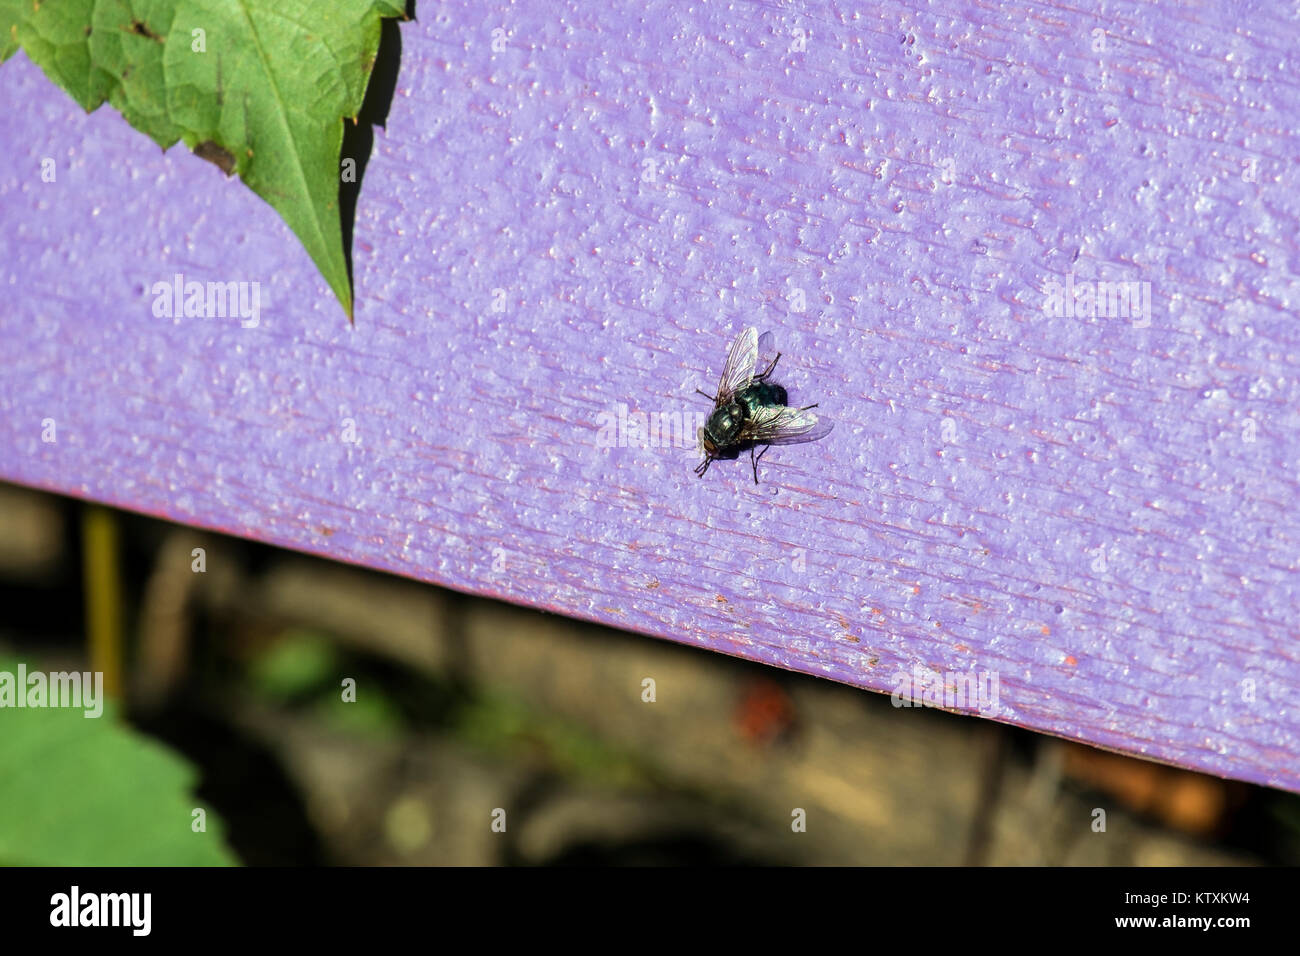 Blue bottle fly sits on a purple wooden surface (Calliphora vomitoria) Stock Photo